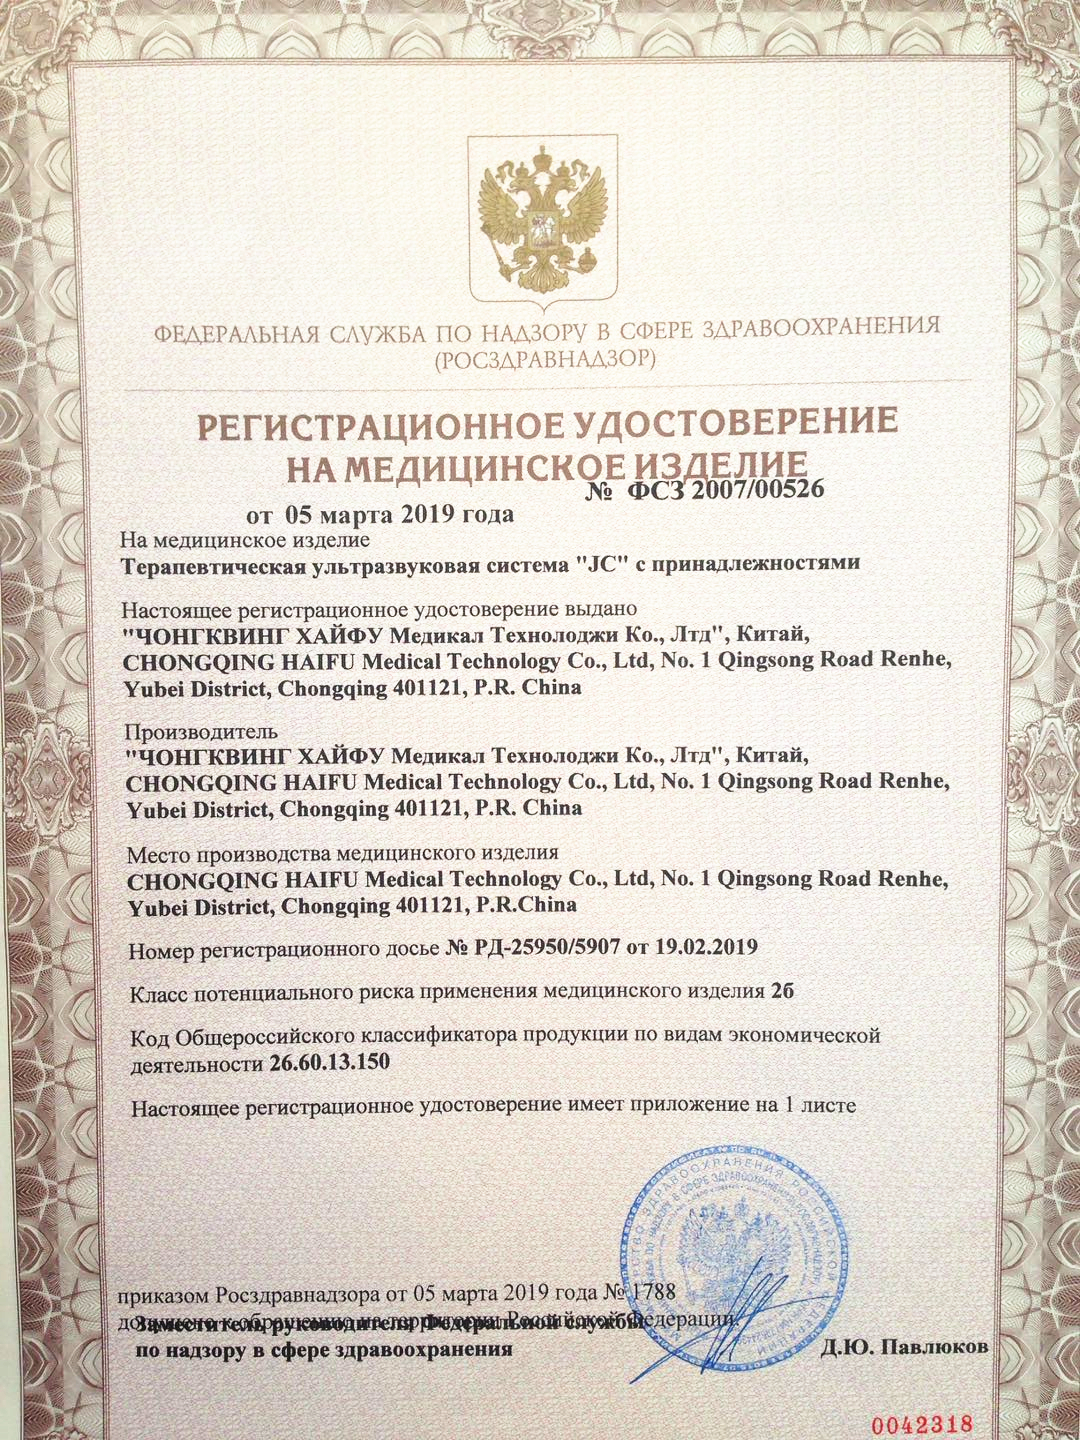 Certification of Russian Ministry of Health